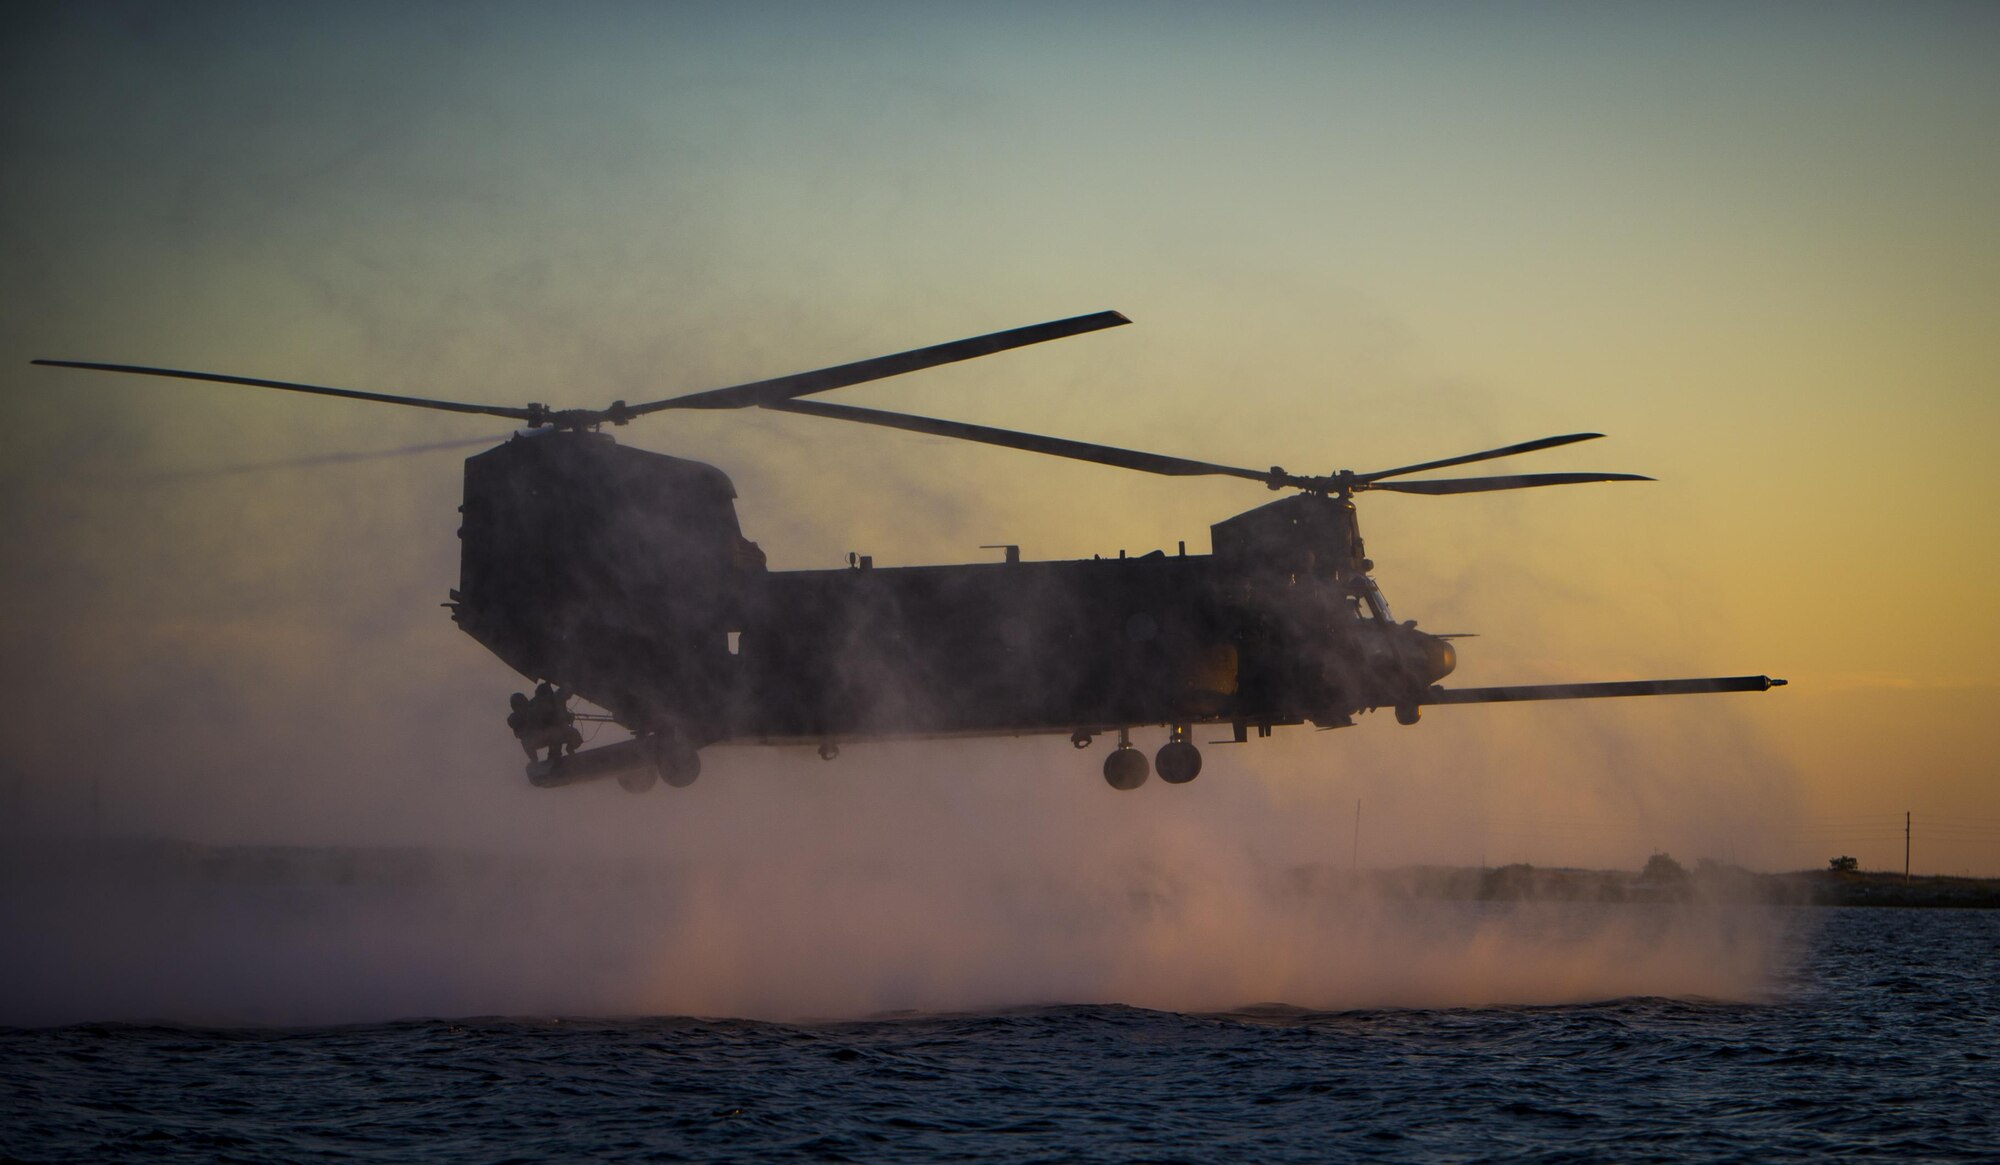 Marine Raiders with the Marine Corp Special Operations Command perform helocast training with the 160th Special Operations Aviation Regiment out of Fort Campbell, Kentucky, at Hurlburt Field, Fla., Oct. 29, 2015. The 160th SOAR, also known as the Night Stalkers, is a special operations force that provides helicopter aviation support for general purpose forces and joint special operations forces. (U.S. Air Force photo by Senior Airman Christopher Callaway) 